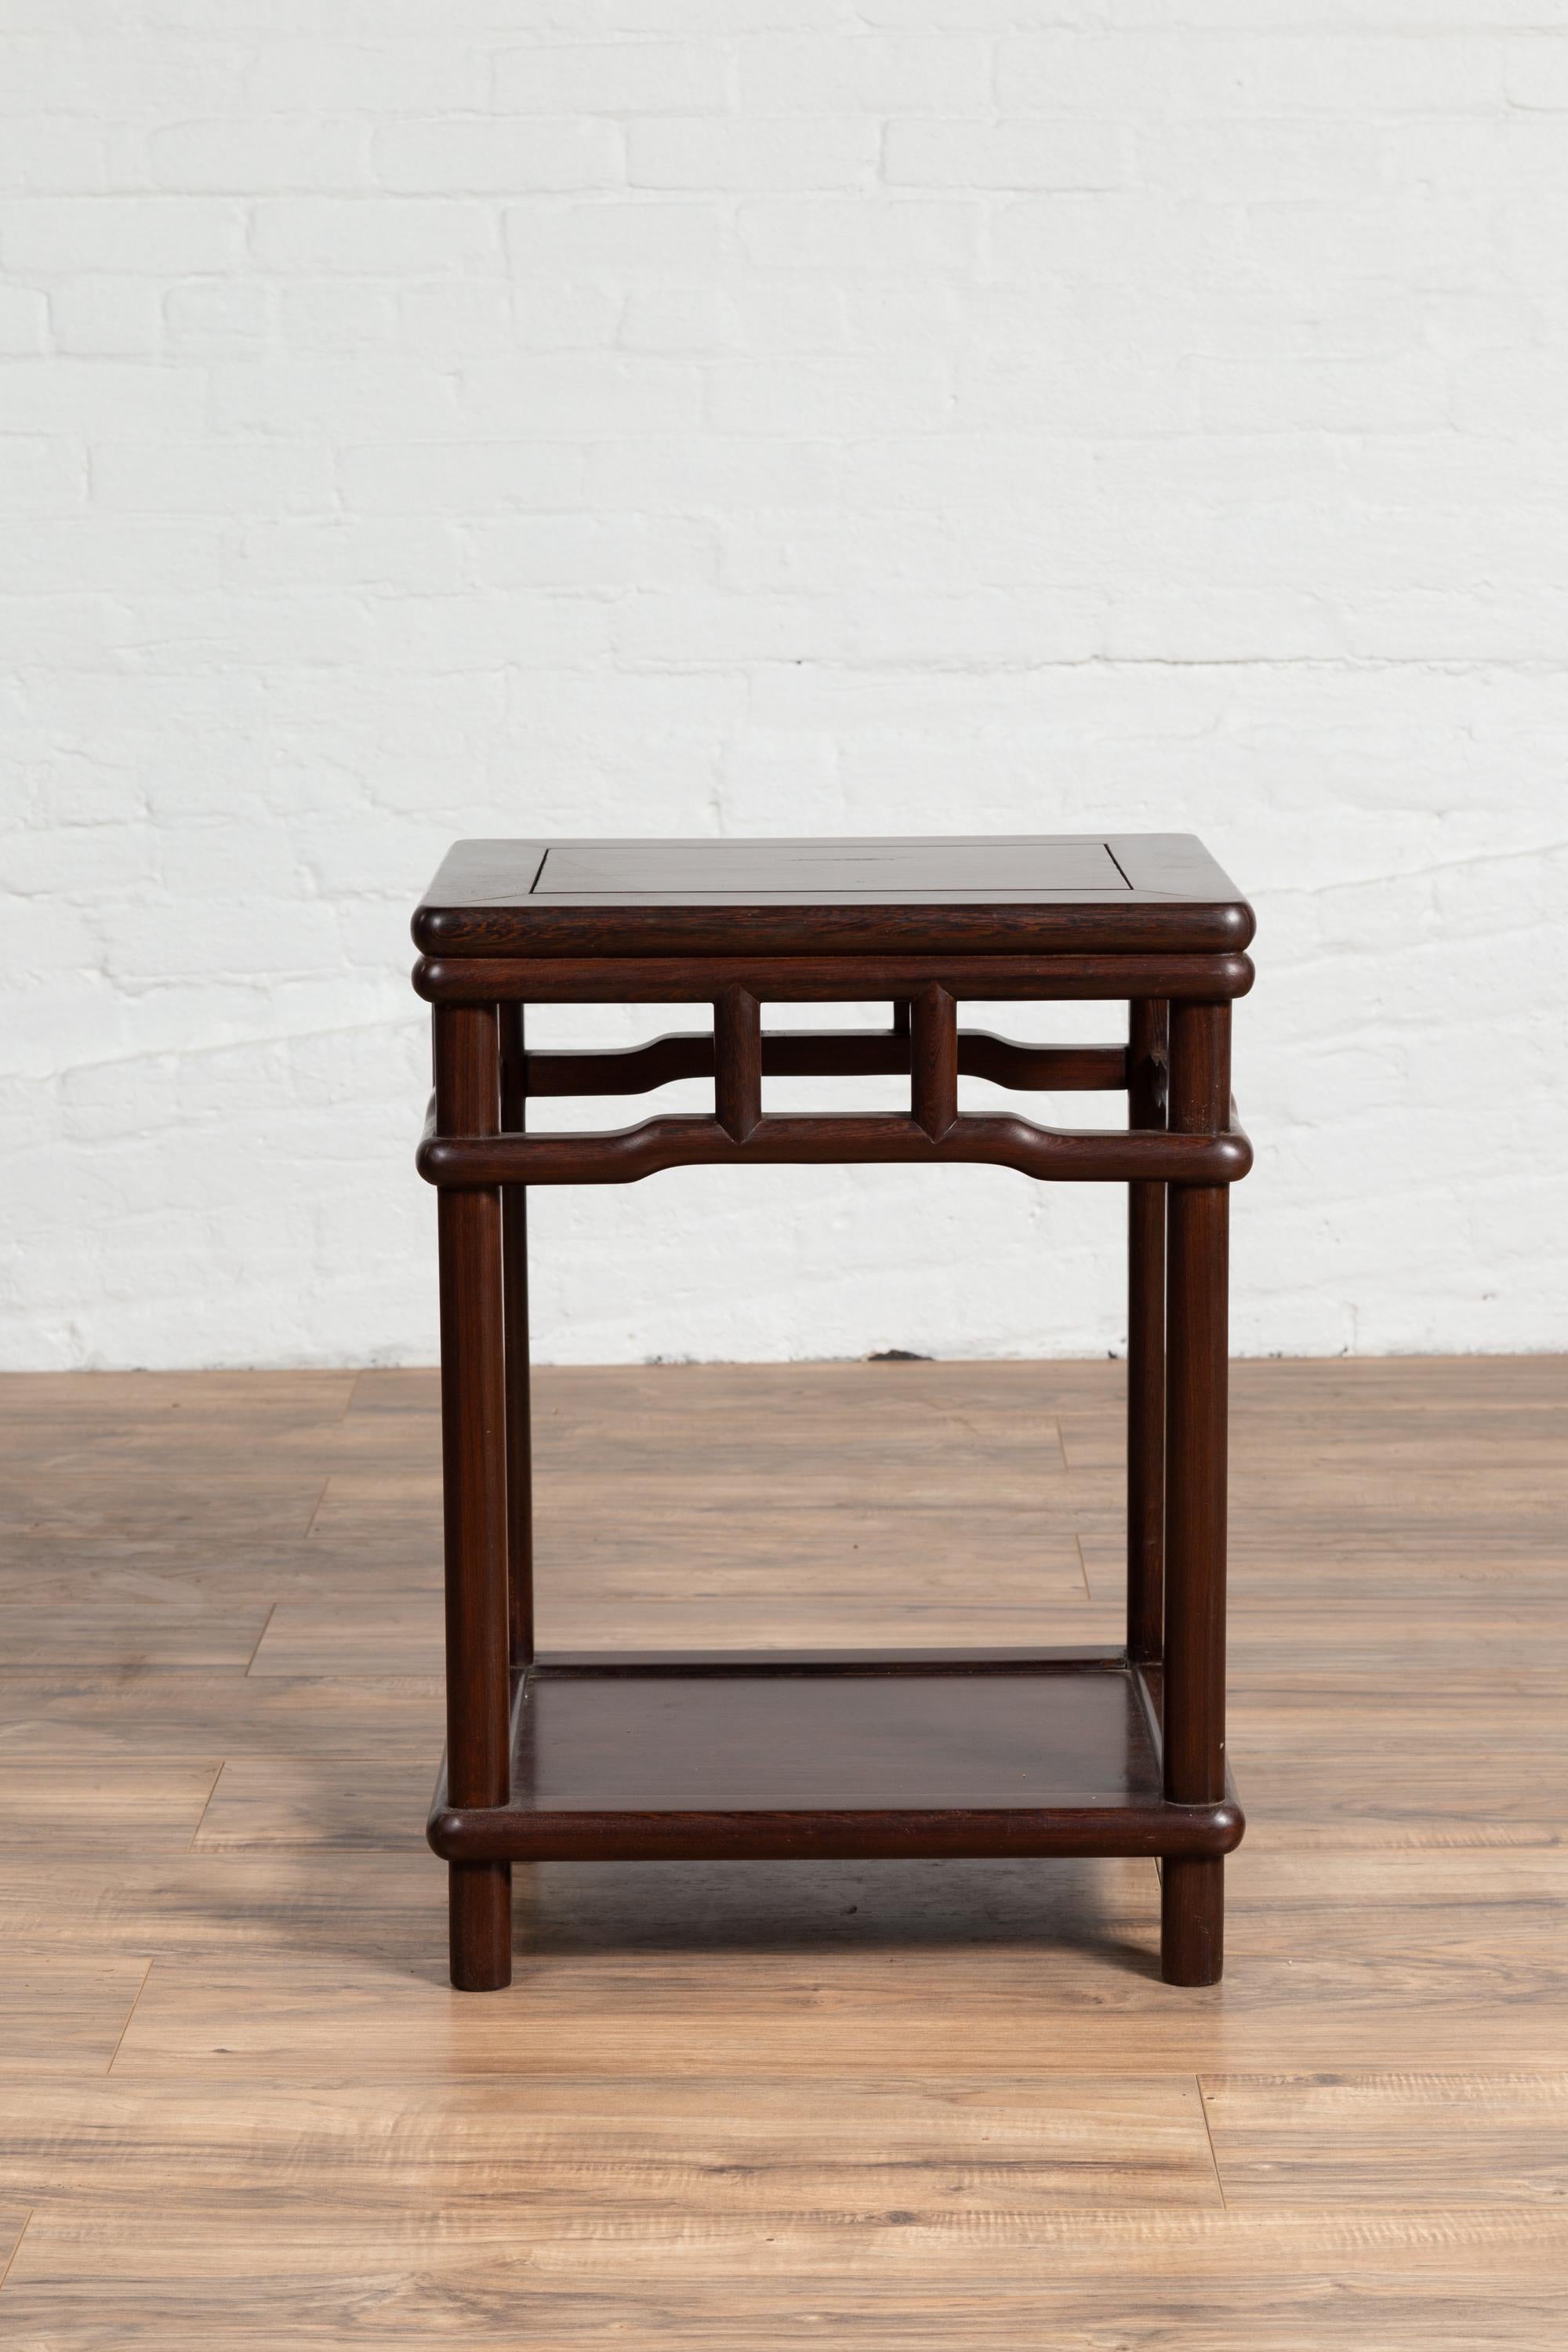 Chinese Ming Style Accent Side Table with Dark Wood Patina and Humpback Apron For Sale 4